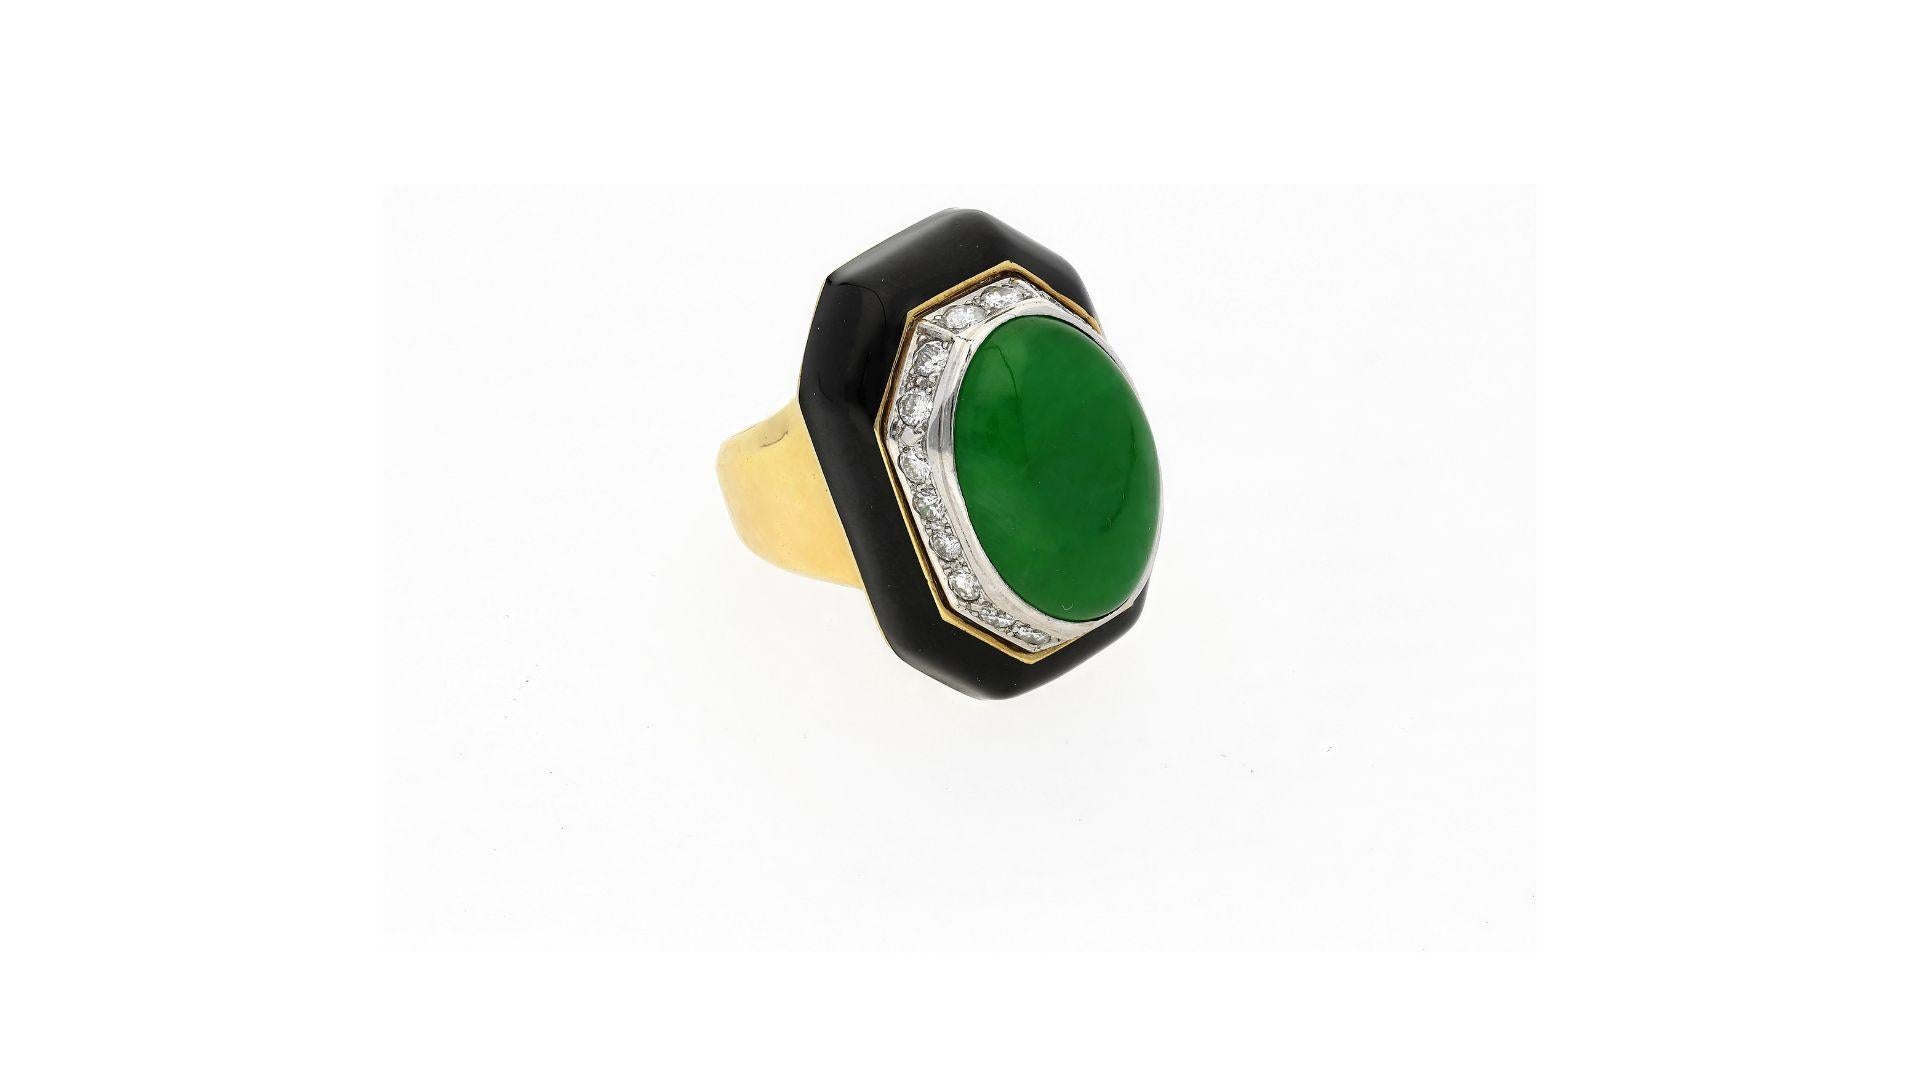 David Webb Signed Untreated Jade, Diamond, And Onyx Bezel Ring In Platinum And 18K Yellow Gold. 

Hong Kong Jade And Stone Lab-certified untreated Type A jadeite jade. Secured in a bezel setting, adorned with 20 round-cut diamonds. Paired with an